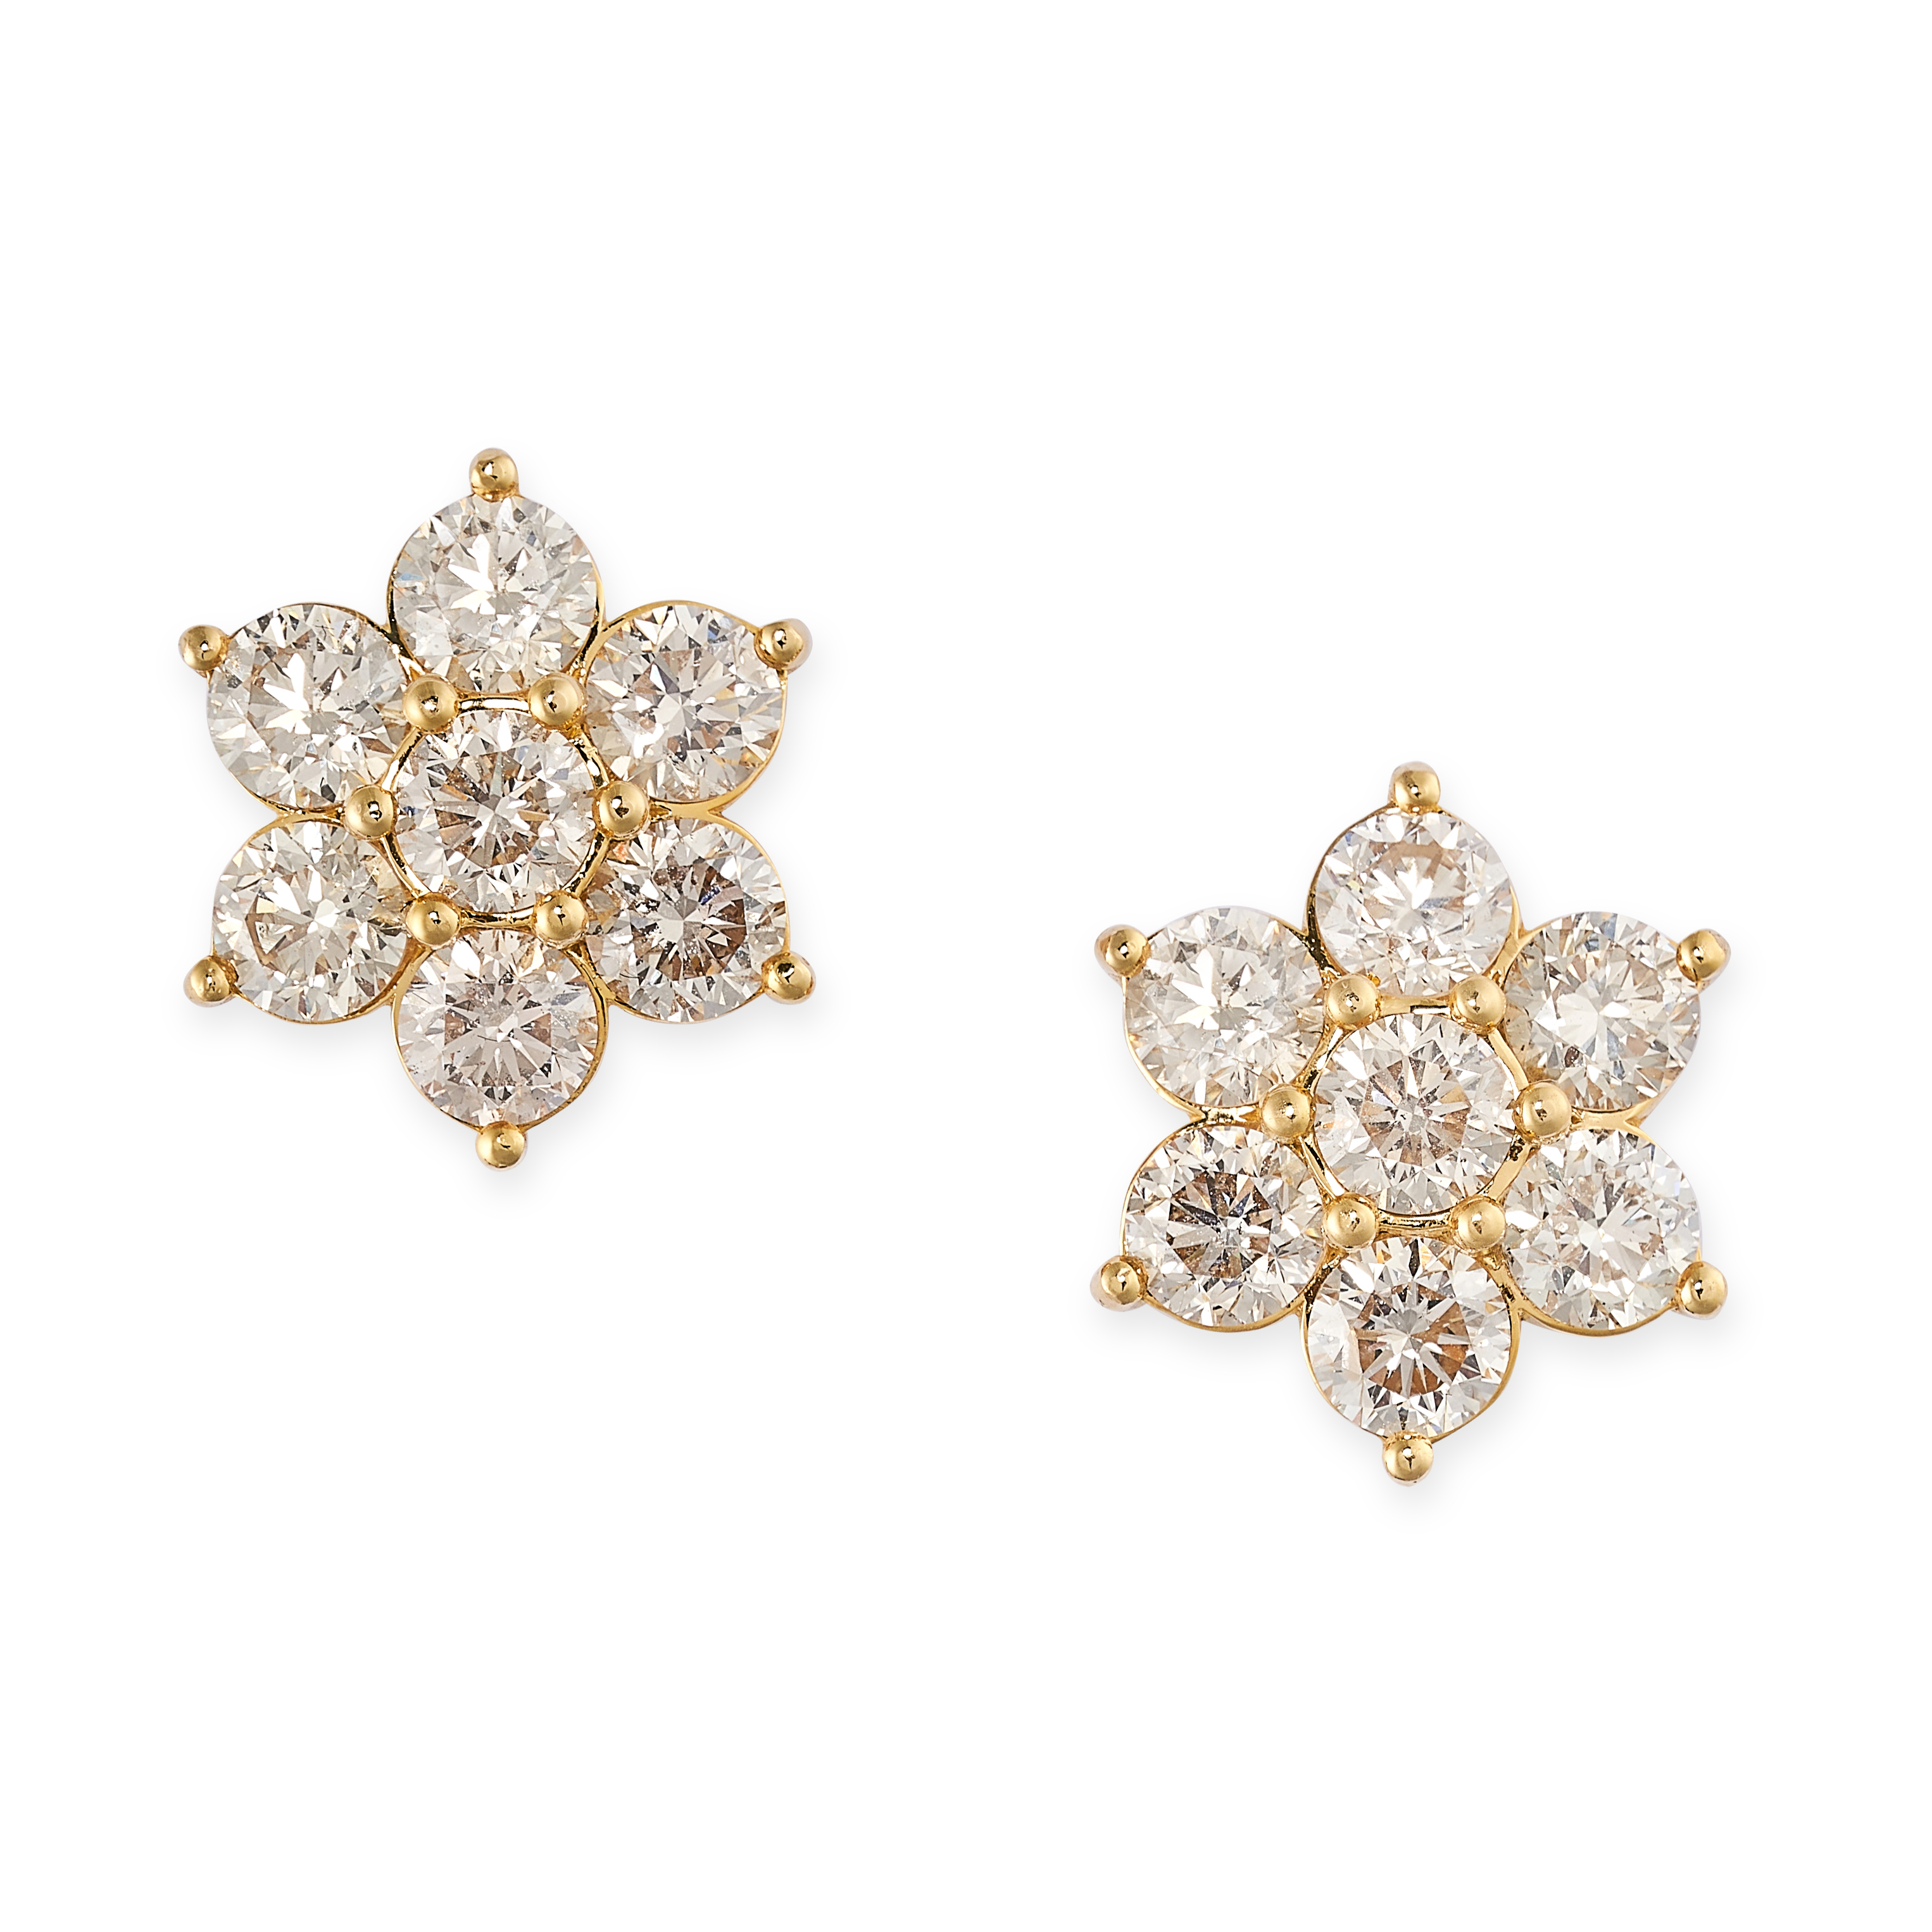 A PAIR OF DIAMOND CLUSTER STUD EARRINGS in 18ct yellow gold, each set with a cluster of round